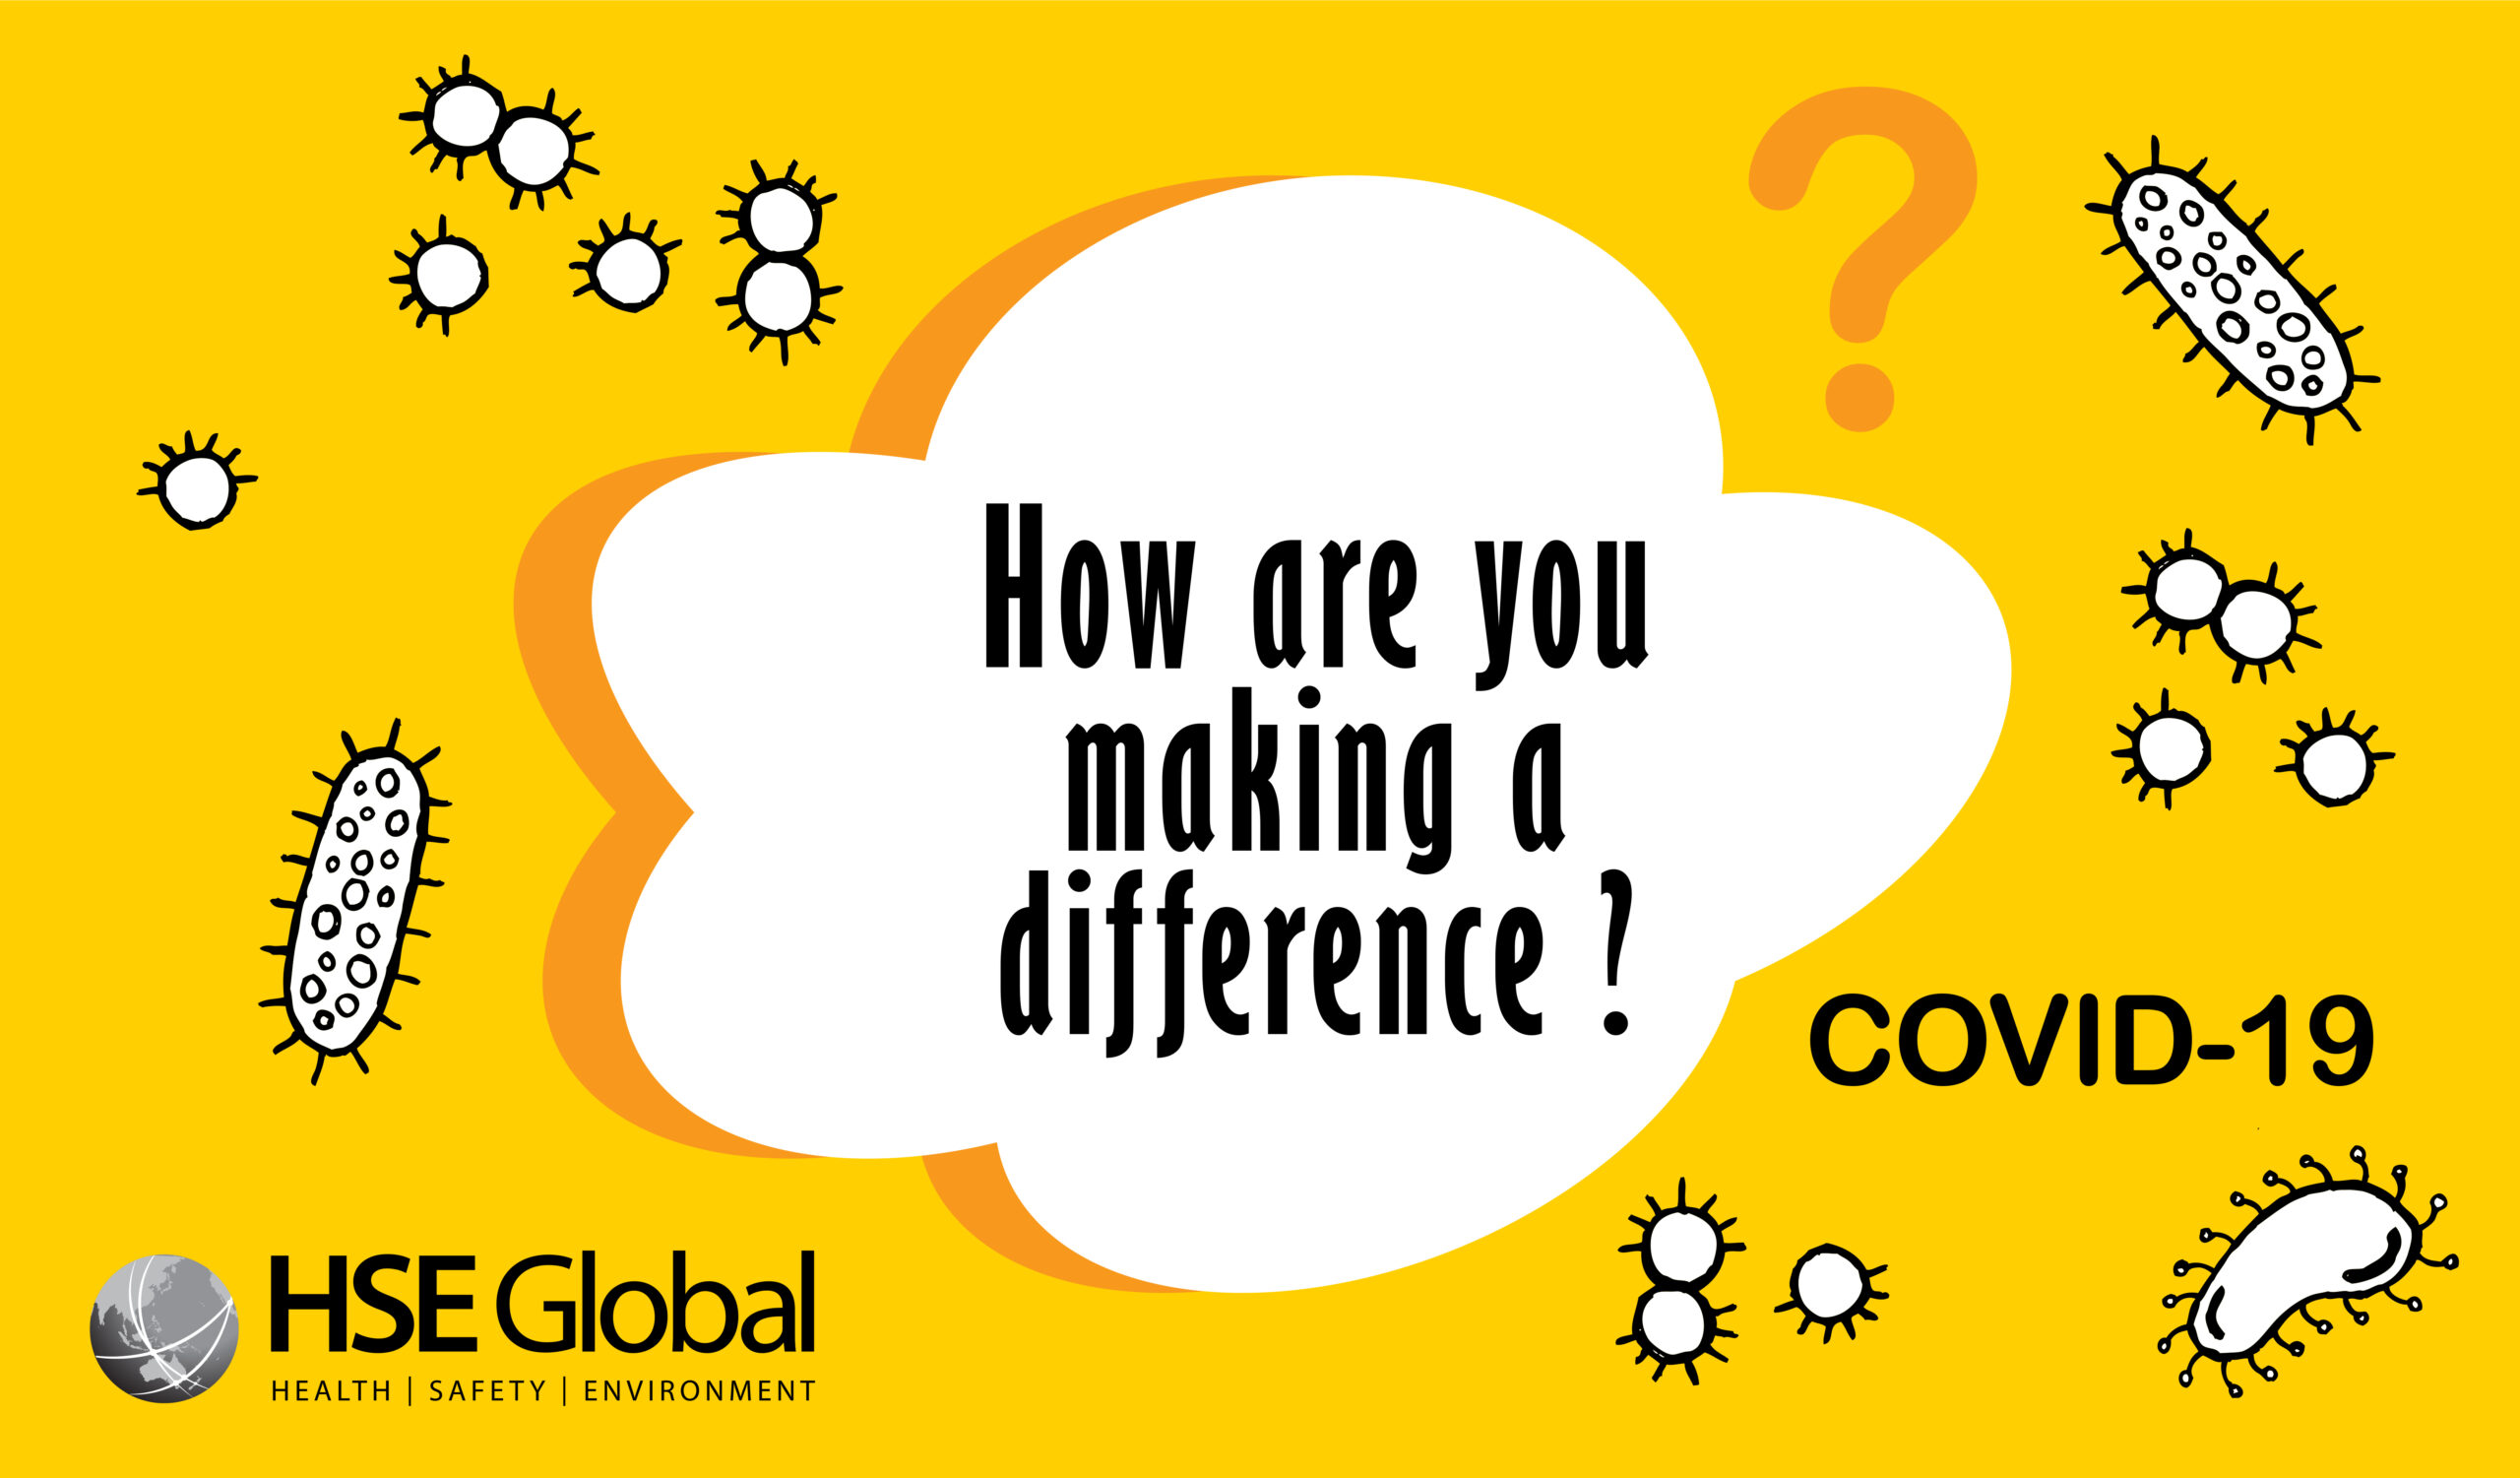 How are you making a difference?